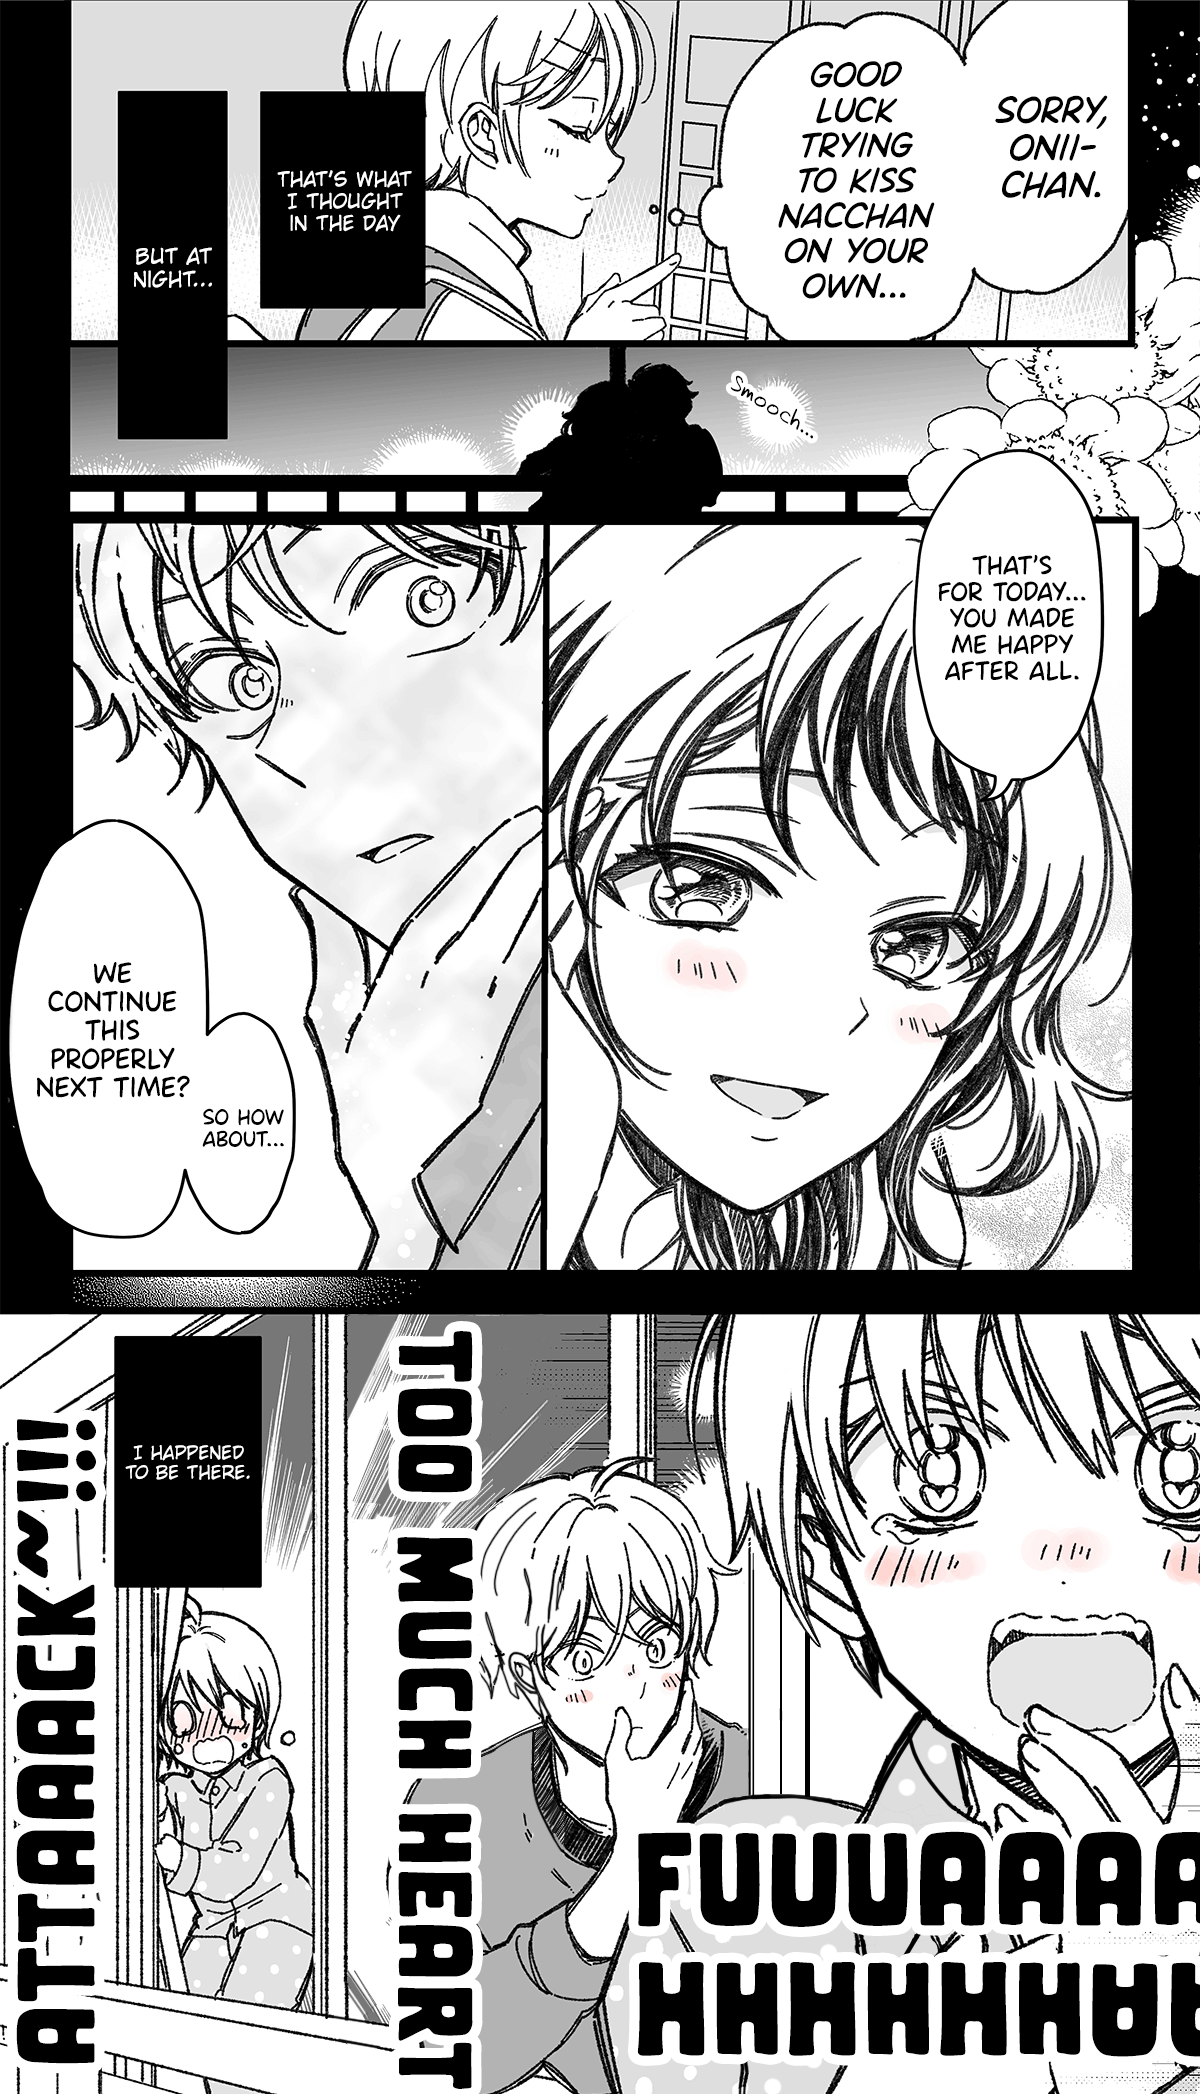 15 Minutes 'til They Actually Start Dating - Page 2